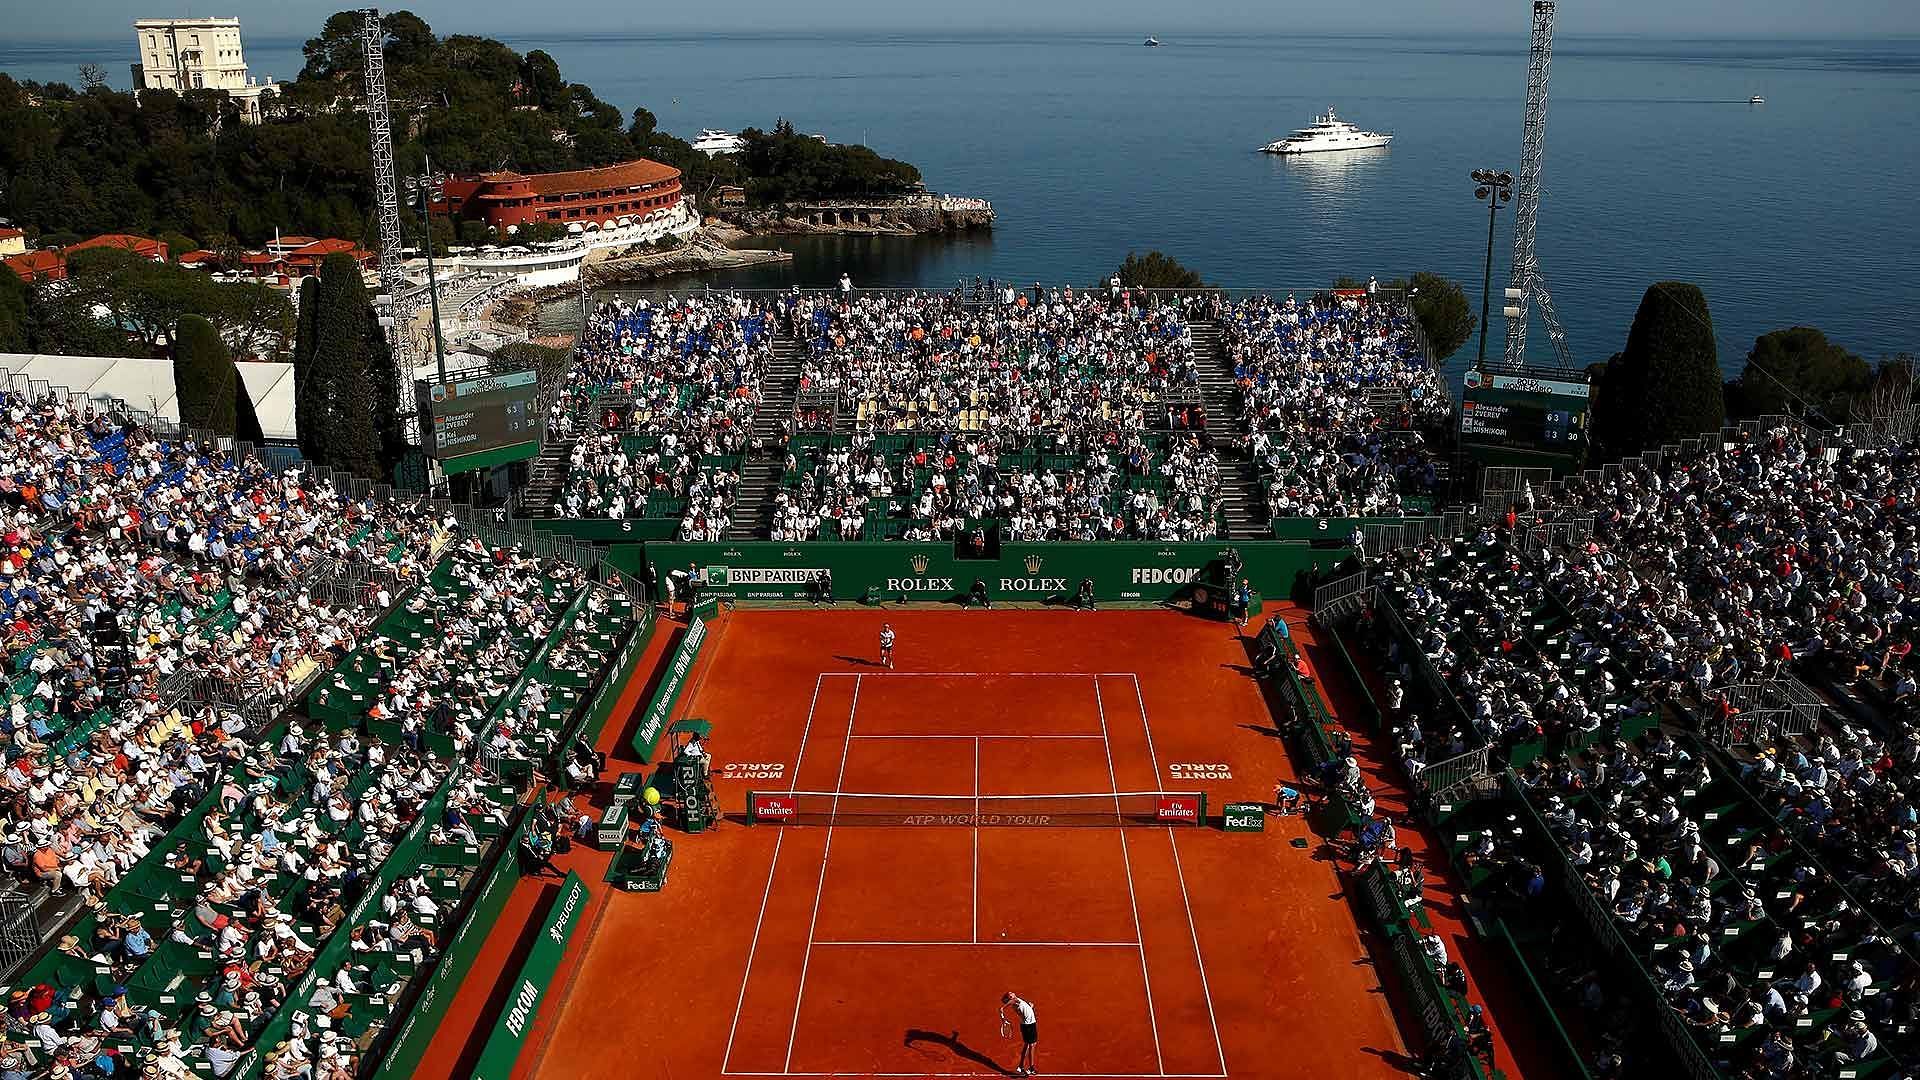 The Monte-Carlo Masters is one of the most prestigious tournaments played on clay